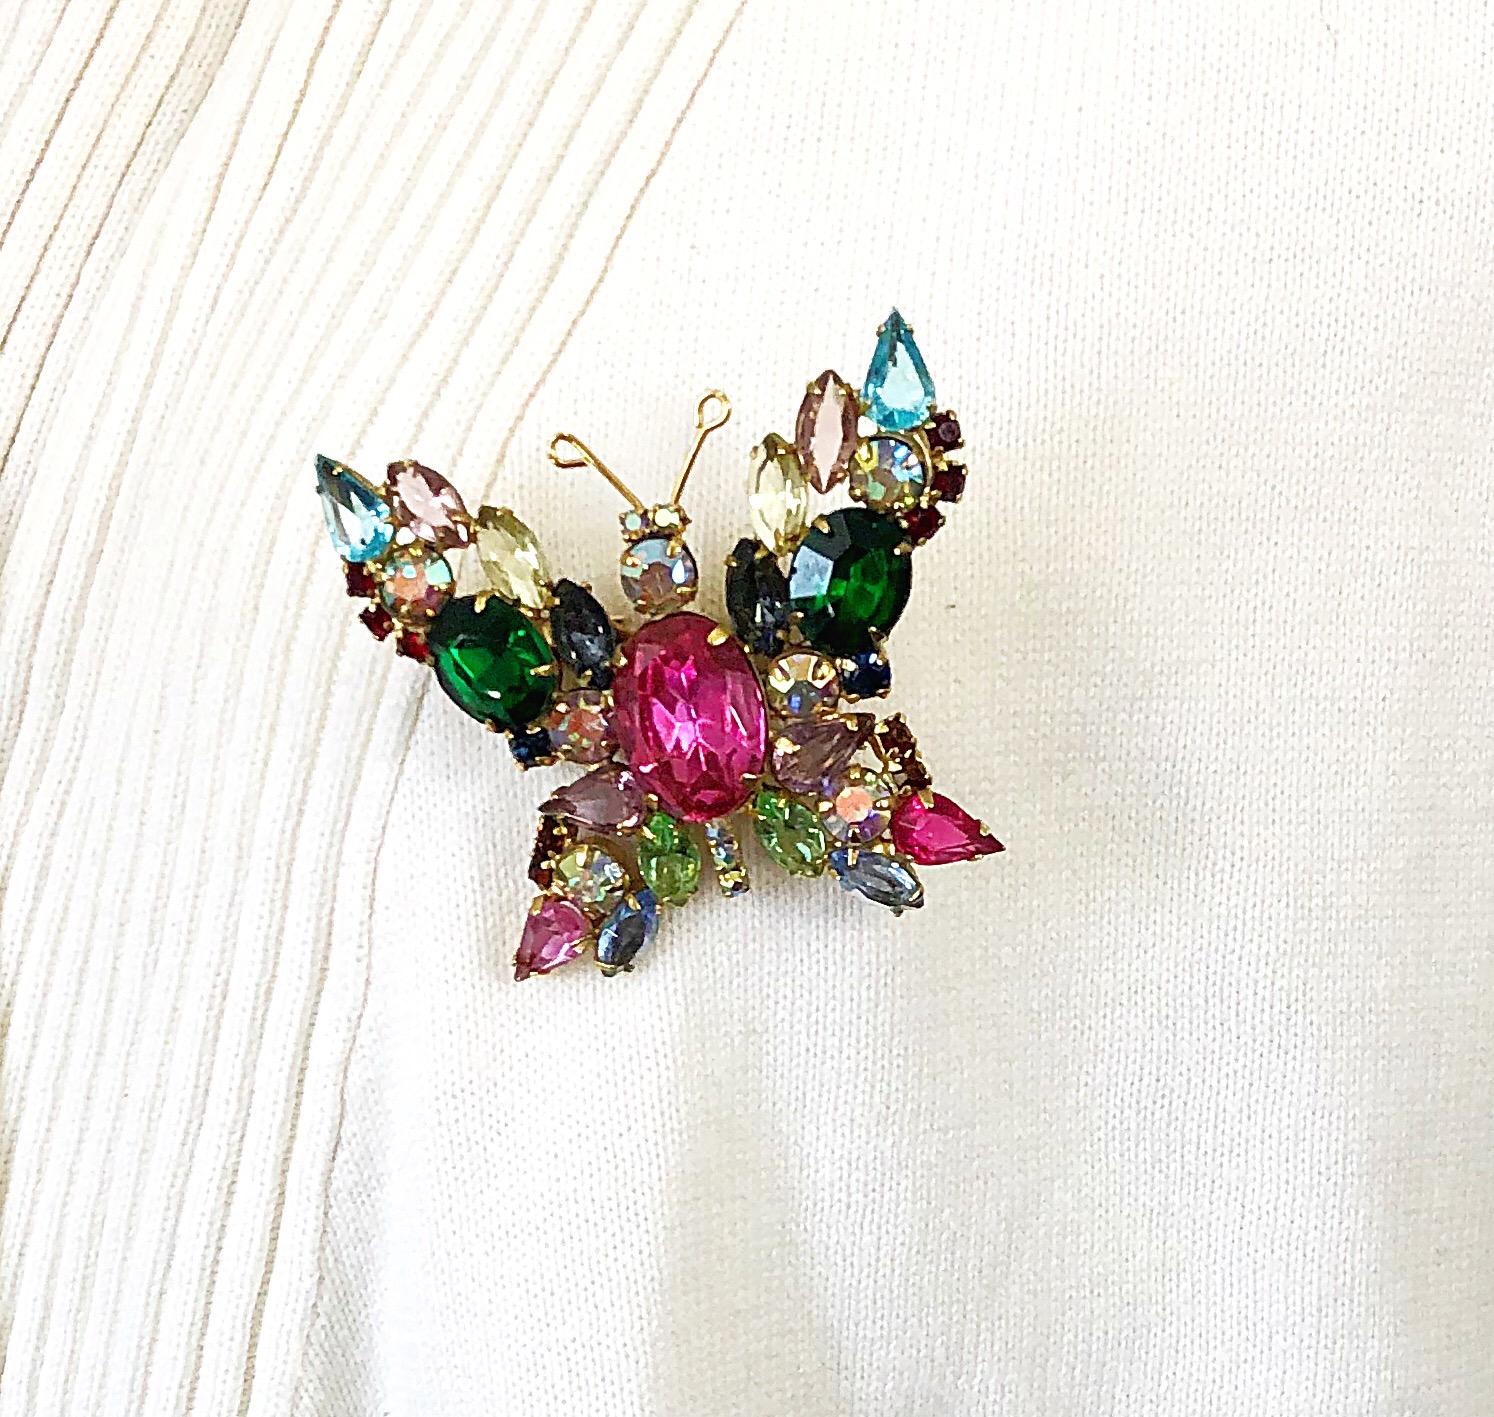 Beautiful early 1960s large butterfly rhinestone brooch / pin ! Features vibrant colored rhinestones in various shades of pink and fuchsia, green, blue, red, yellow and clear throughout. Gold antennas. Can really add just the right amount of pop to